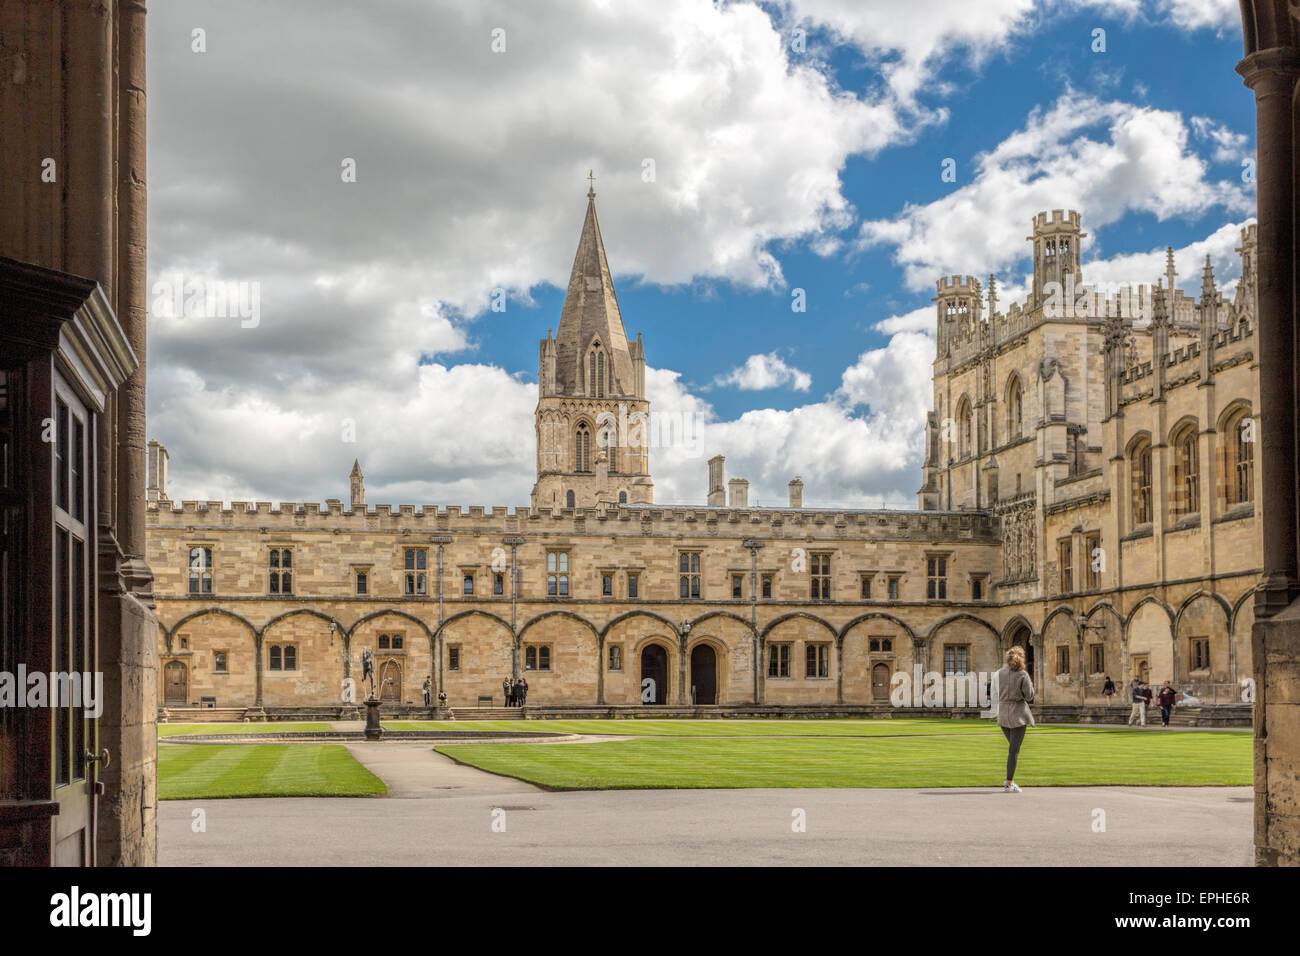 View from St Aldate's through the gates on the main facade of Christ Church College and Tom Quad, Oxford, England, UK. Stock Photo